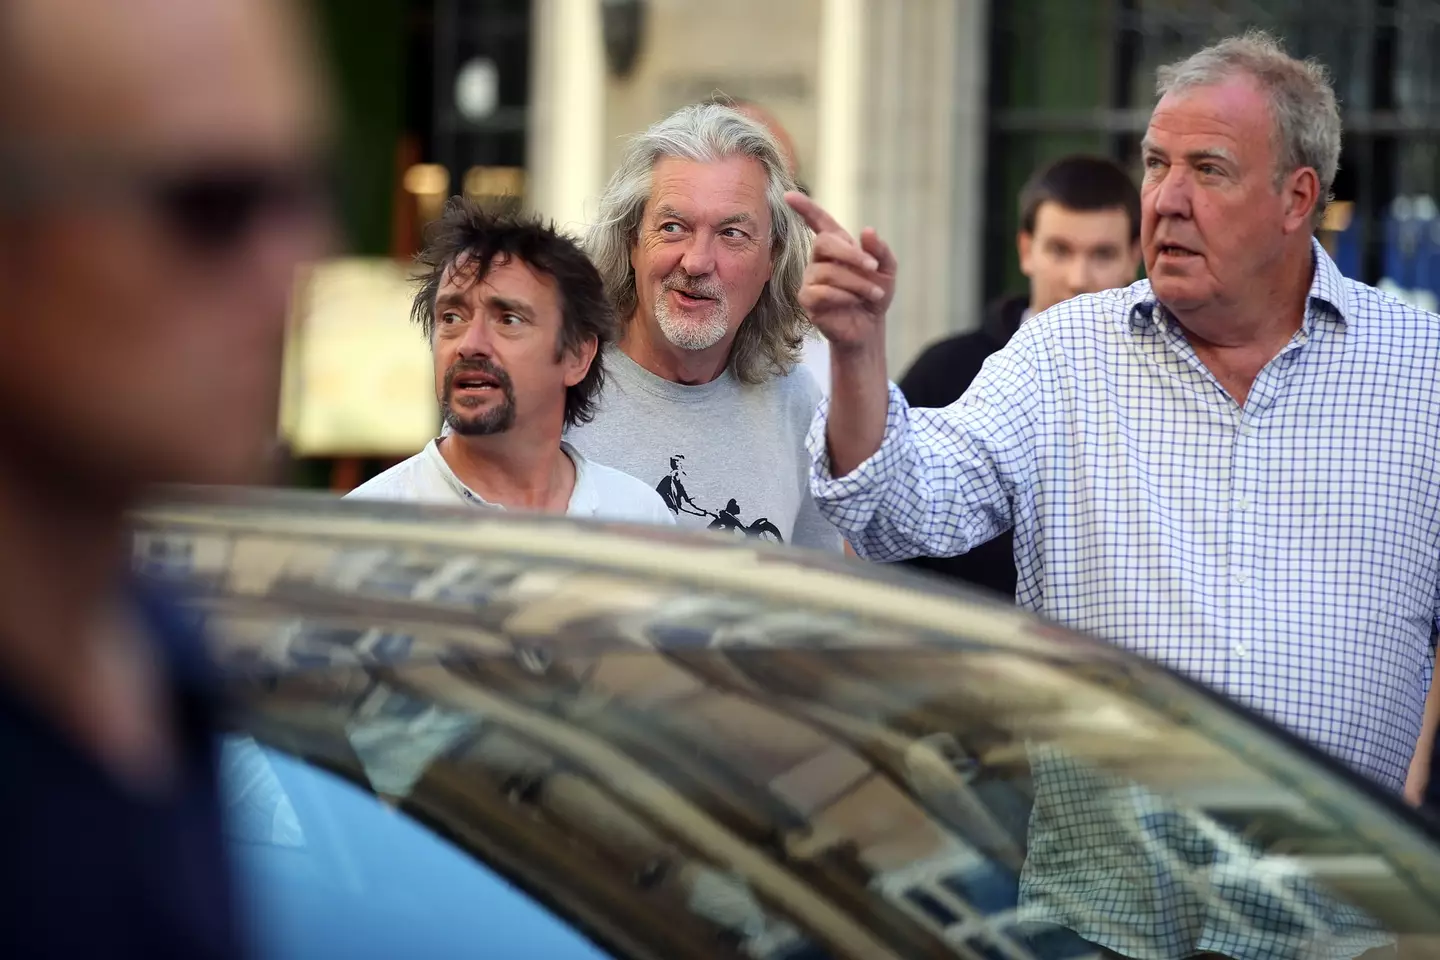 Jeremy Clarkson, Richard Hammond and James May filming The Grand Tour.